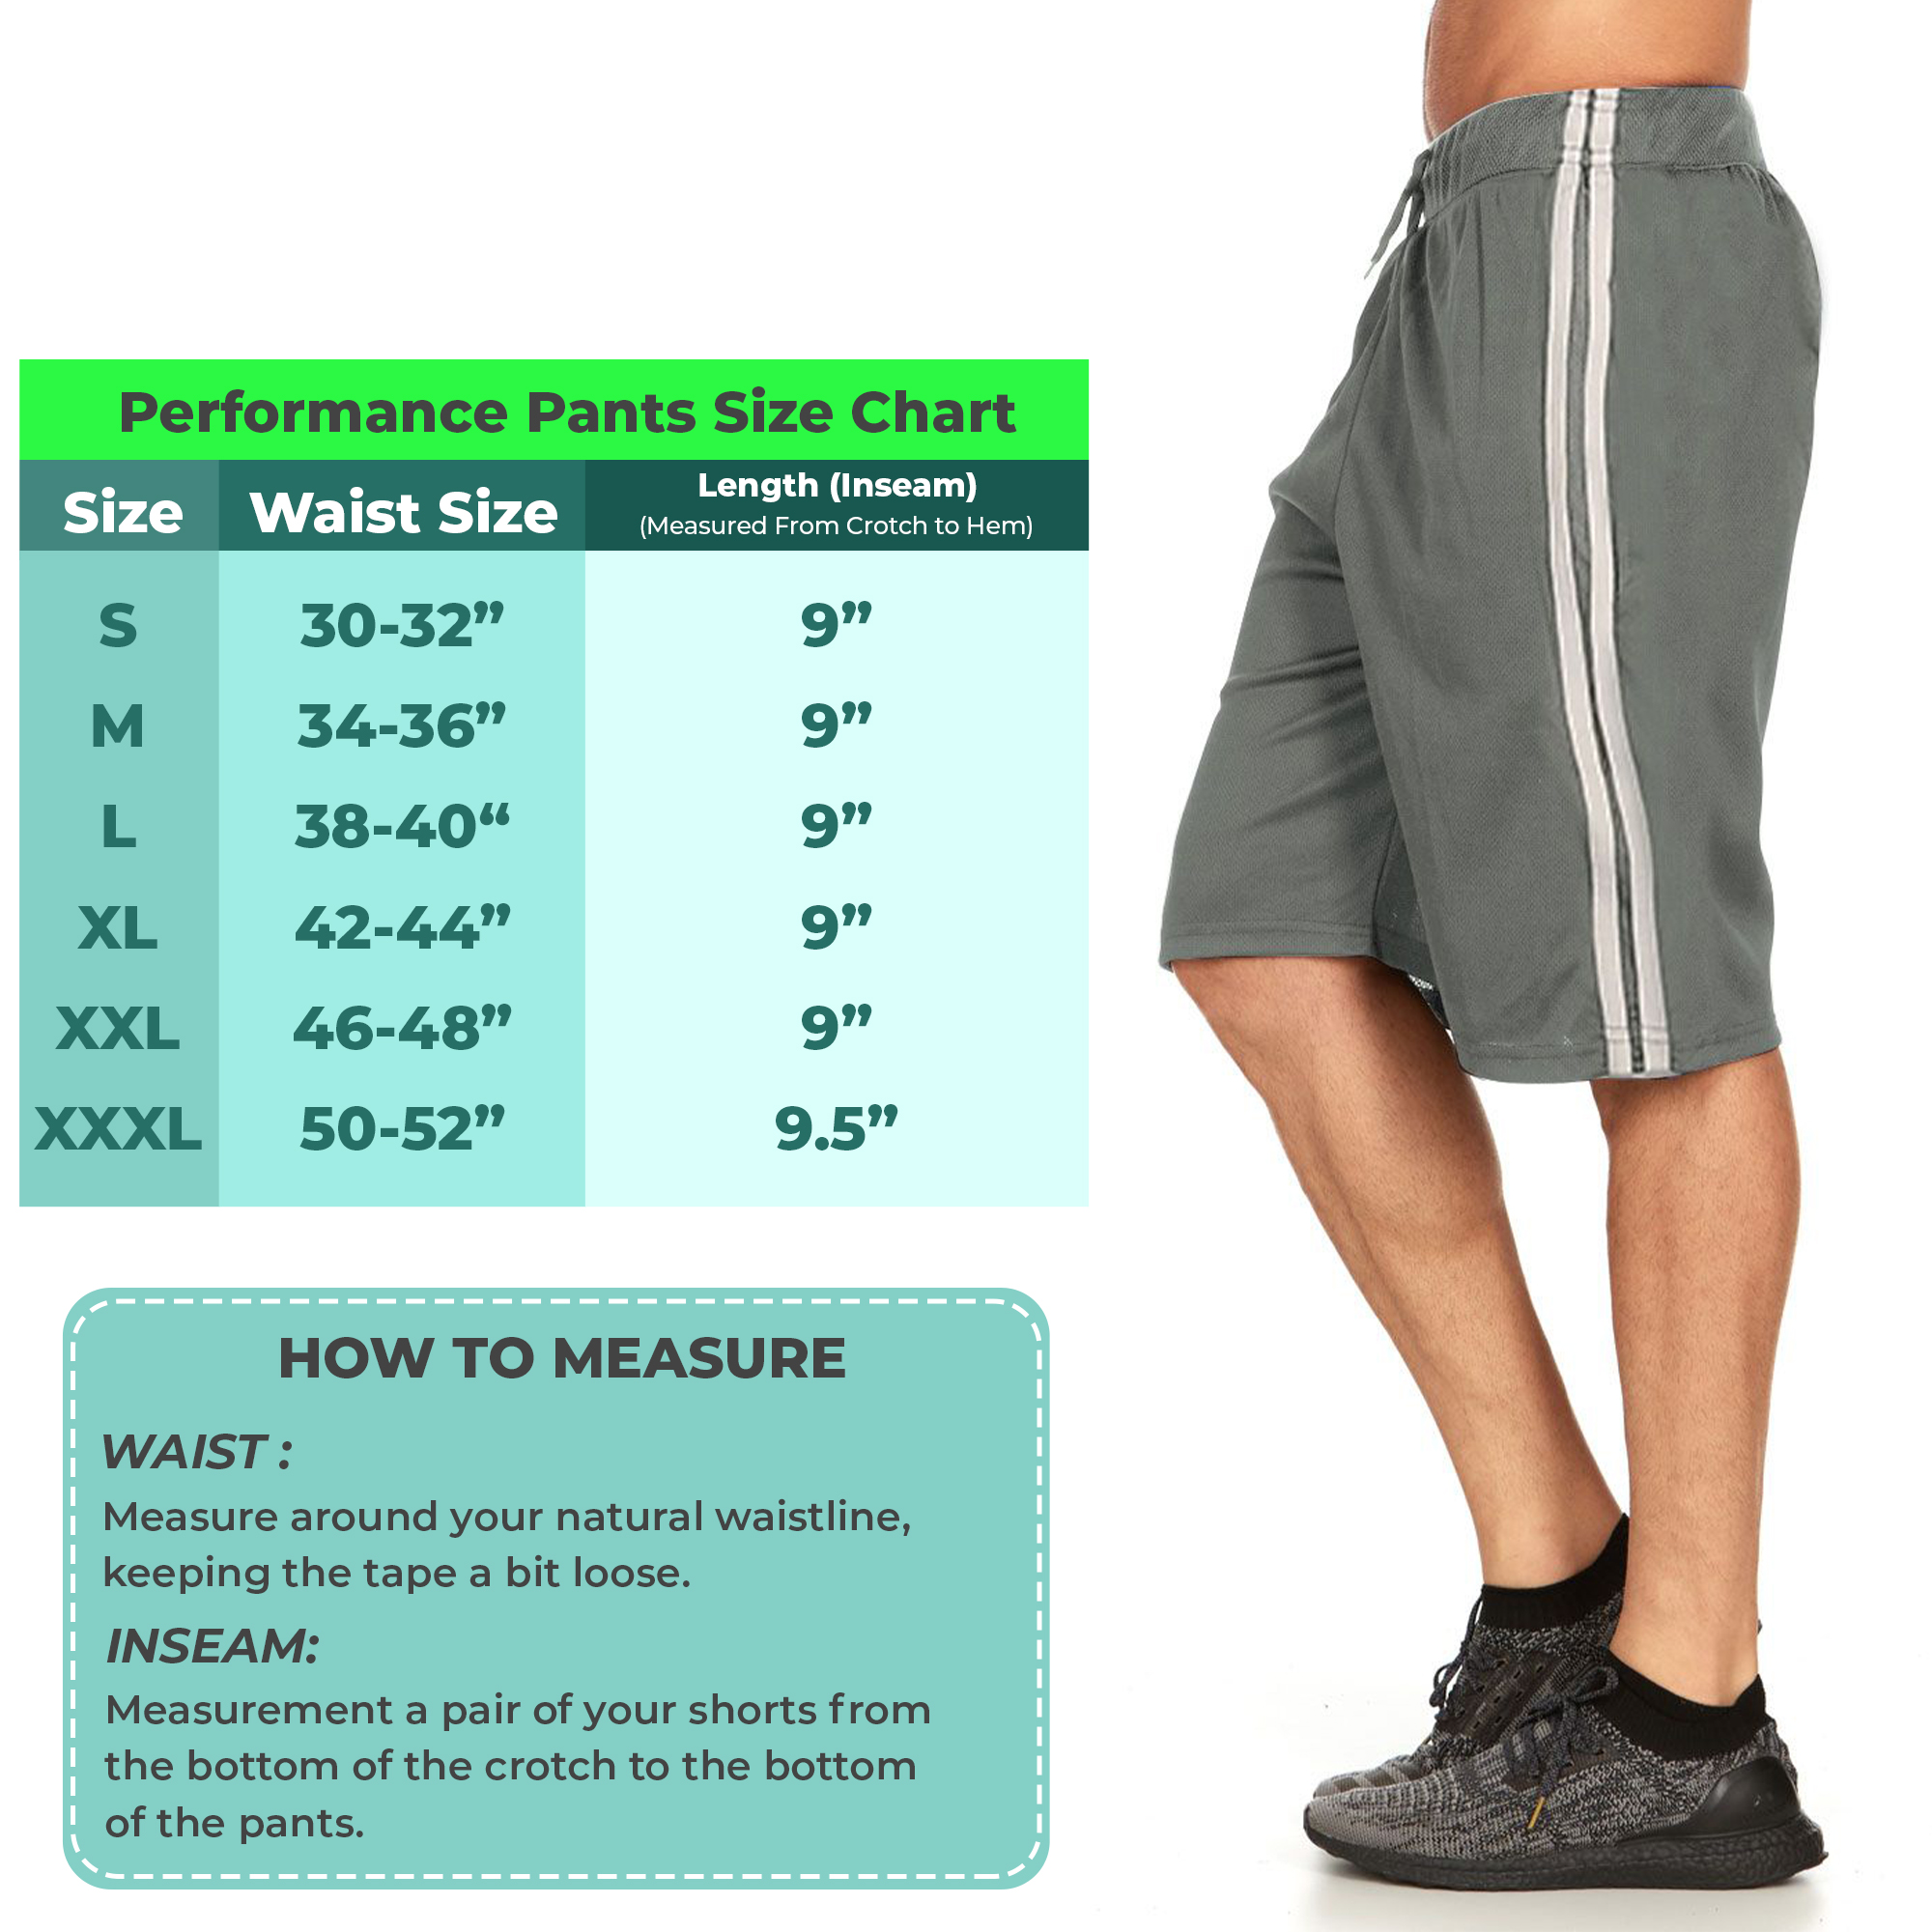 Men's and Big Men's 9" Active Shorts, Mesh Athletic Gym shorts with pockets, Sizes up to 3X - image 2 of 5